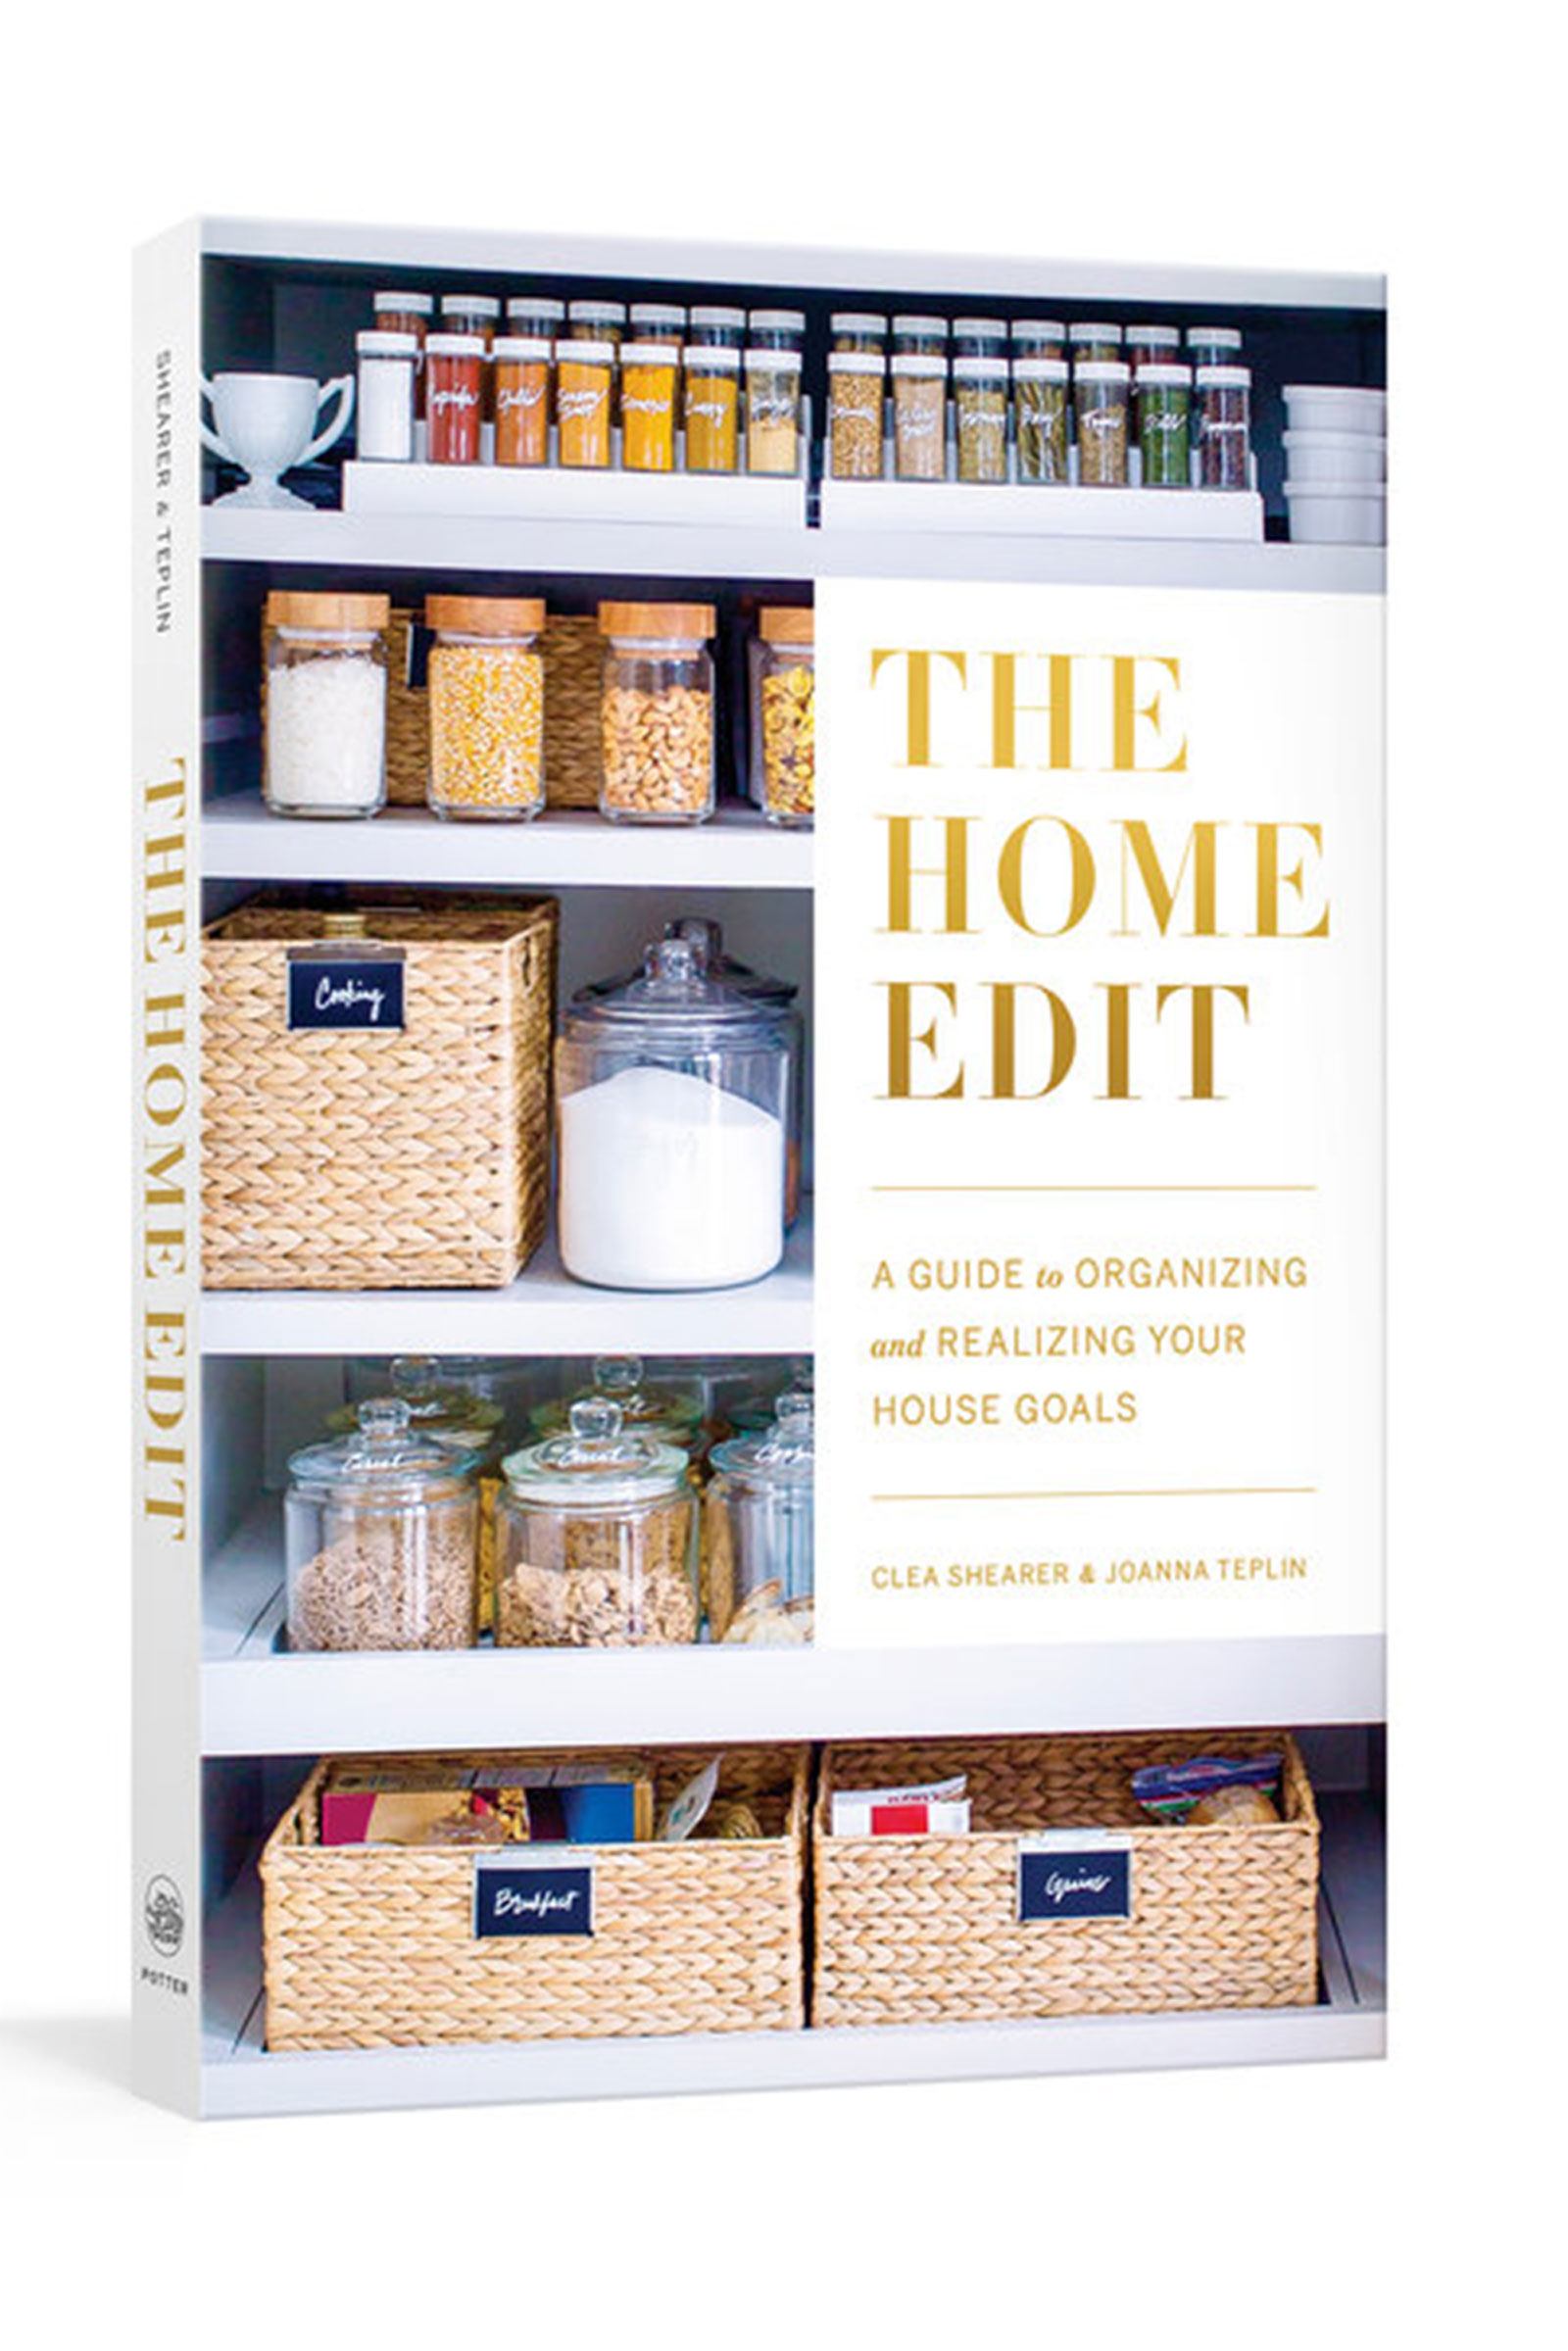 The Home Edit: A Guide to Organizing and Realizing Your House Goals by Clea Shearer